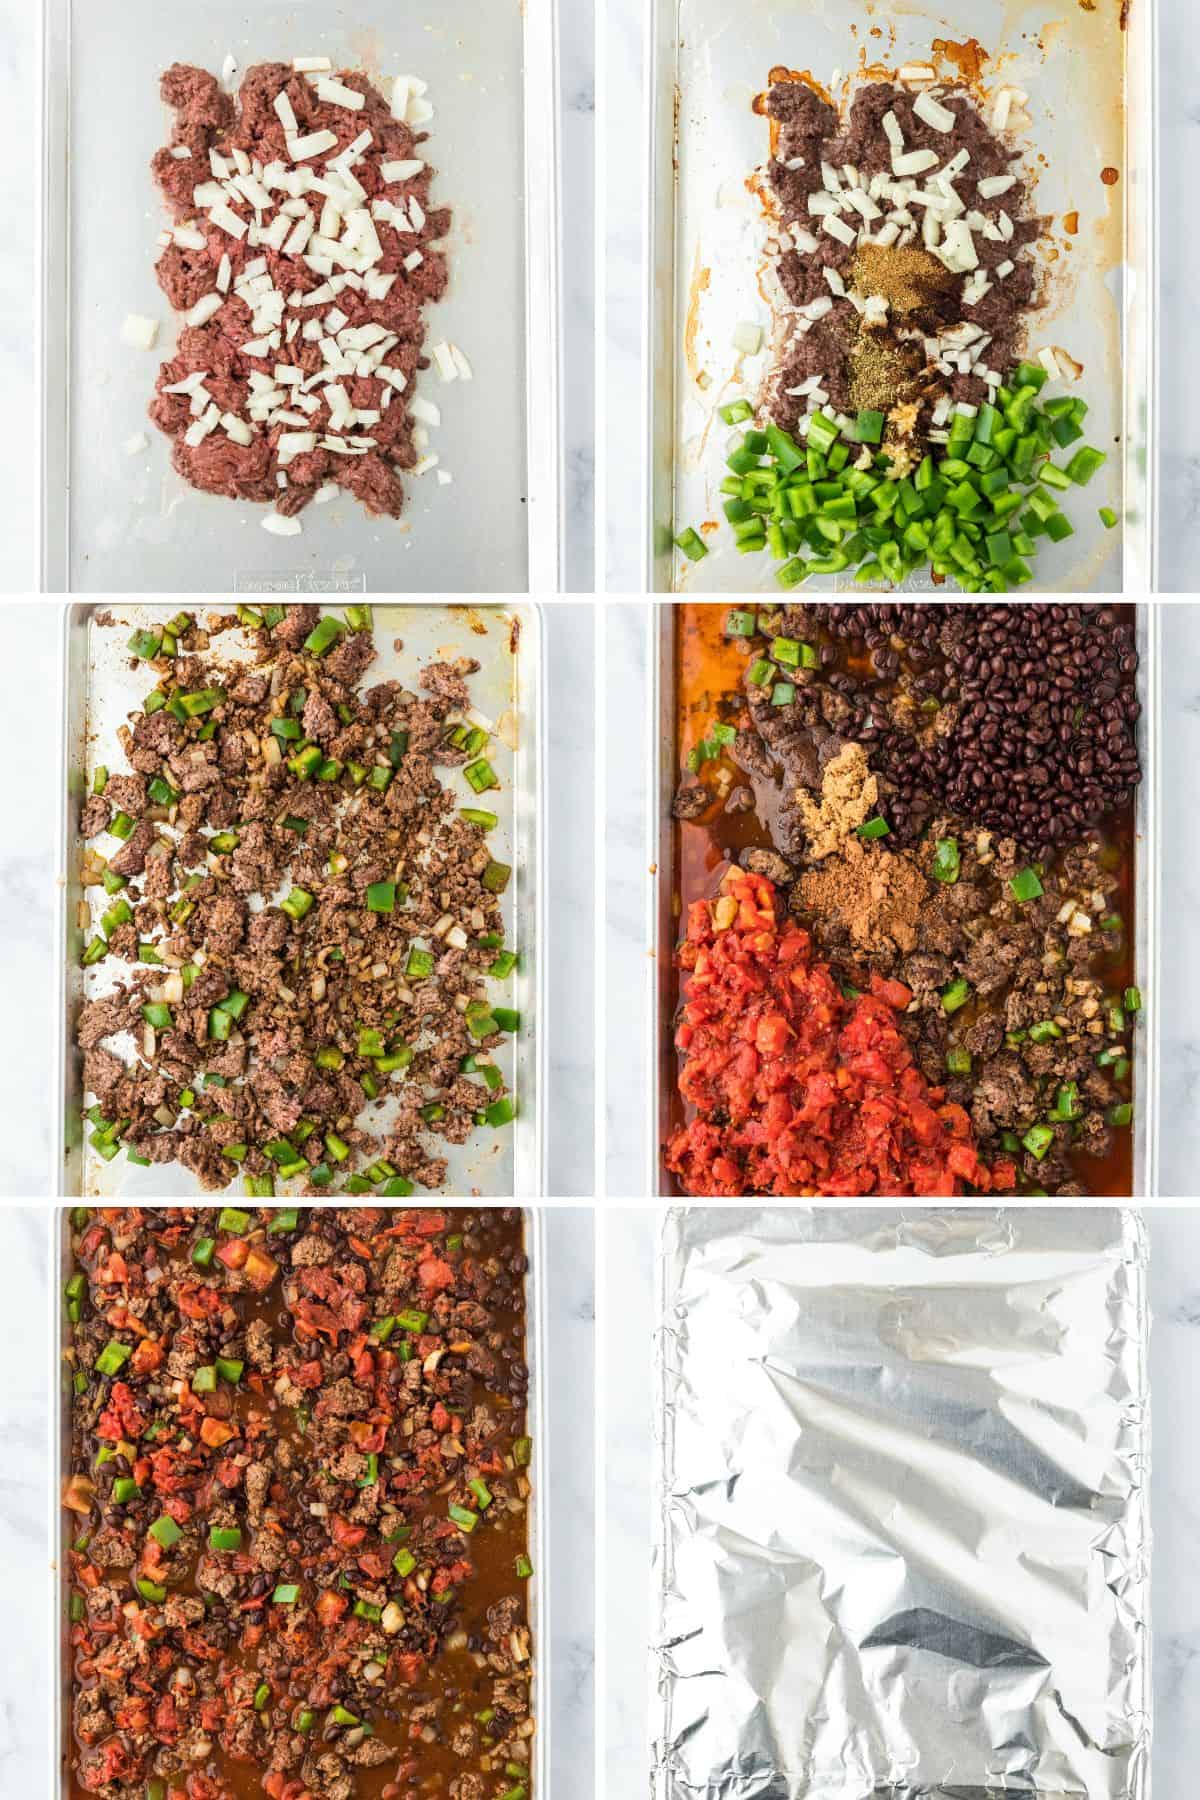 A step by step image collage on how to make sheet pan chili with mixing the veggies with the beef, adding the beans, the spices and the rest of ingredients, and roasting again covering it with foil